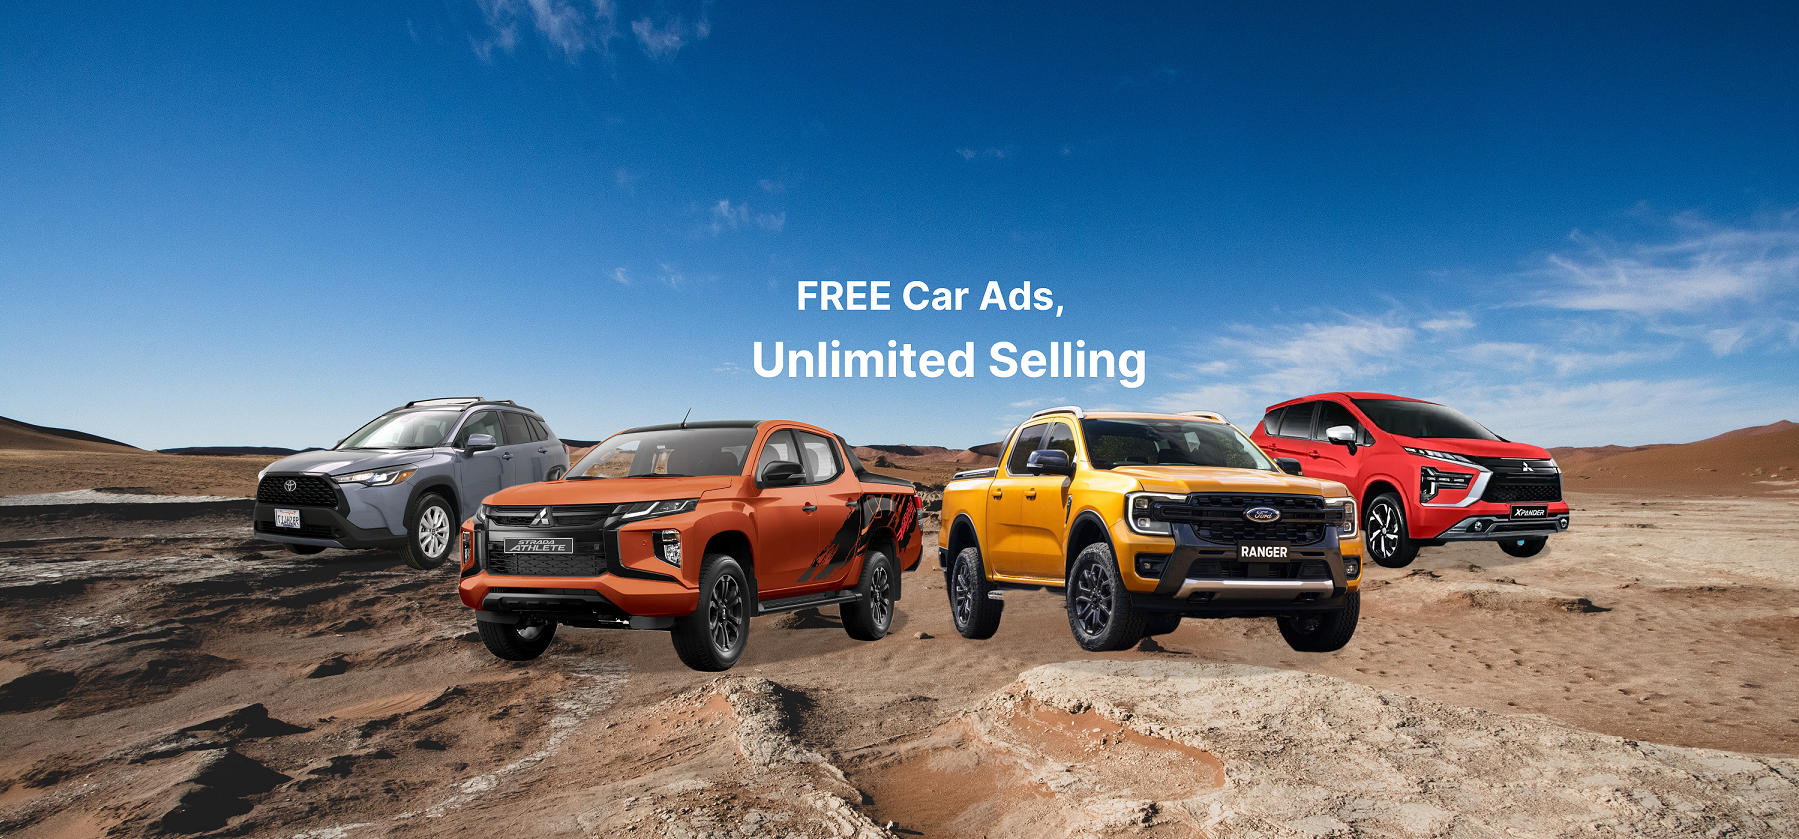 Sell cars for FREE Unlimited